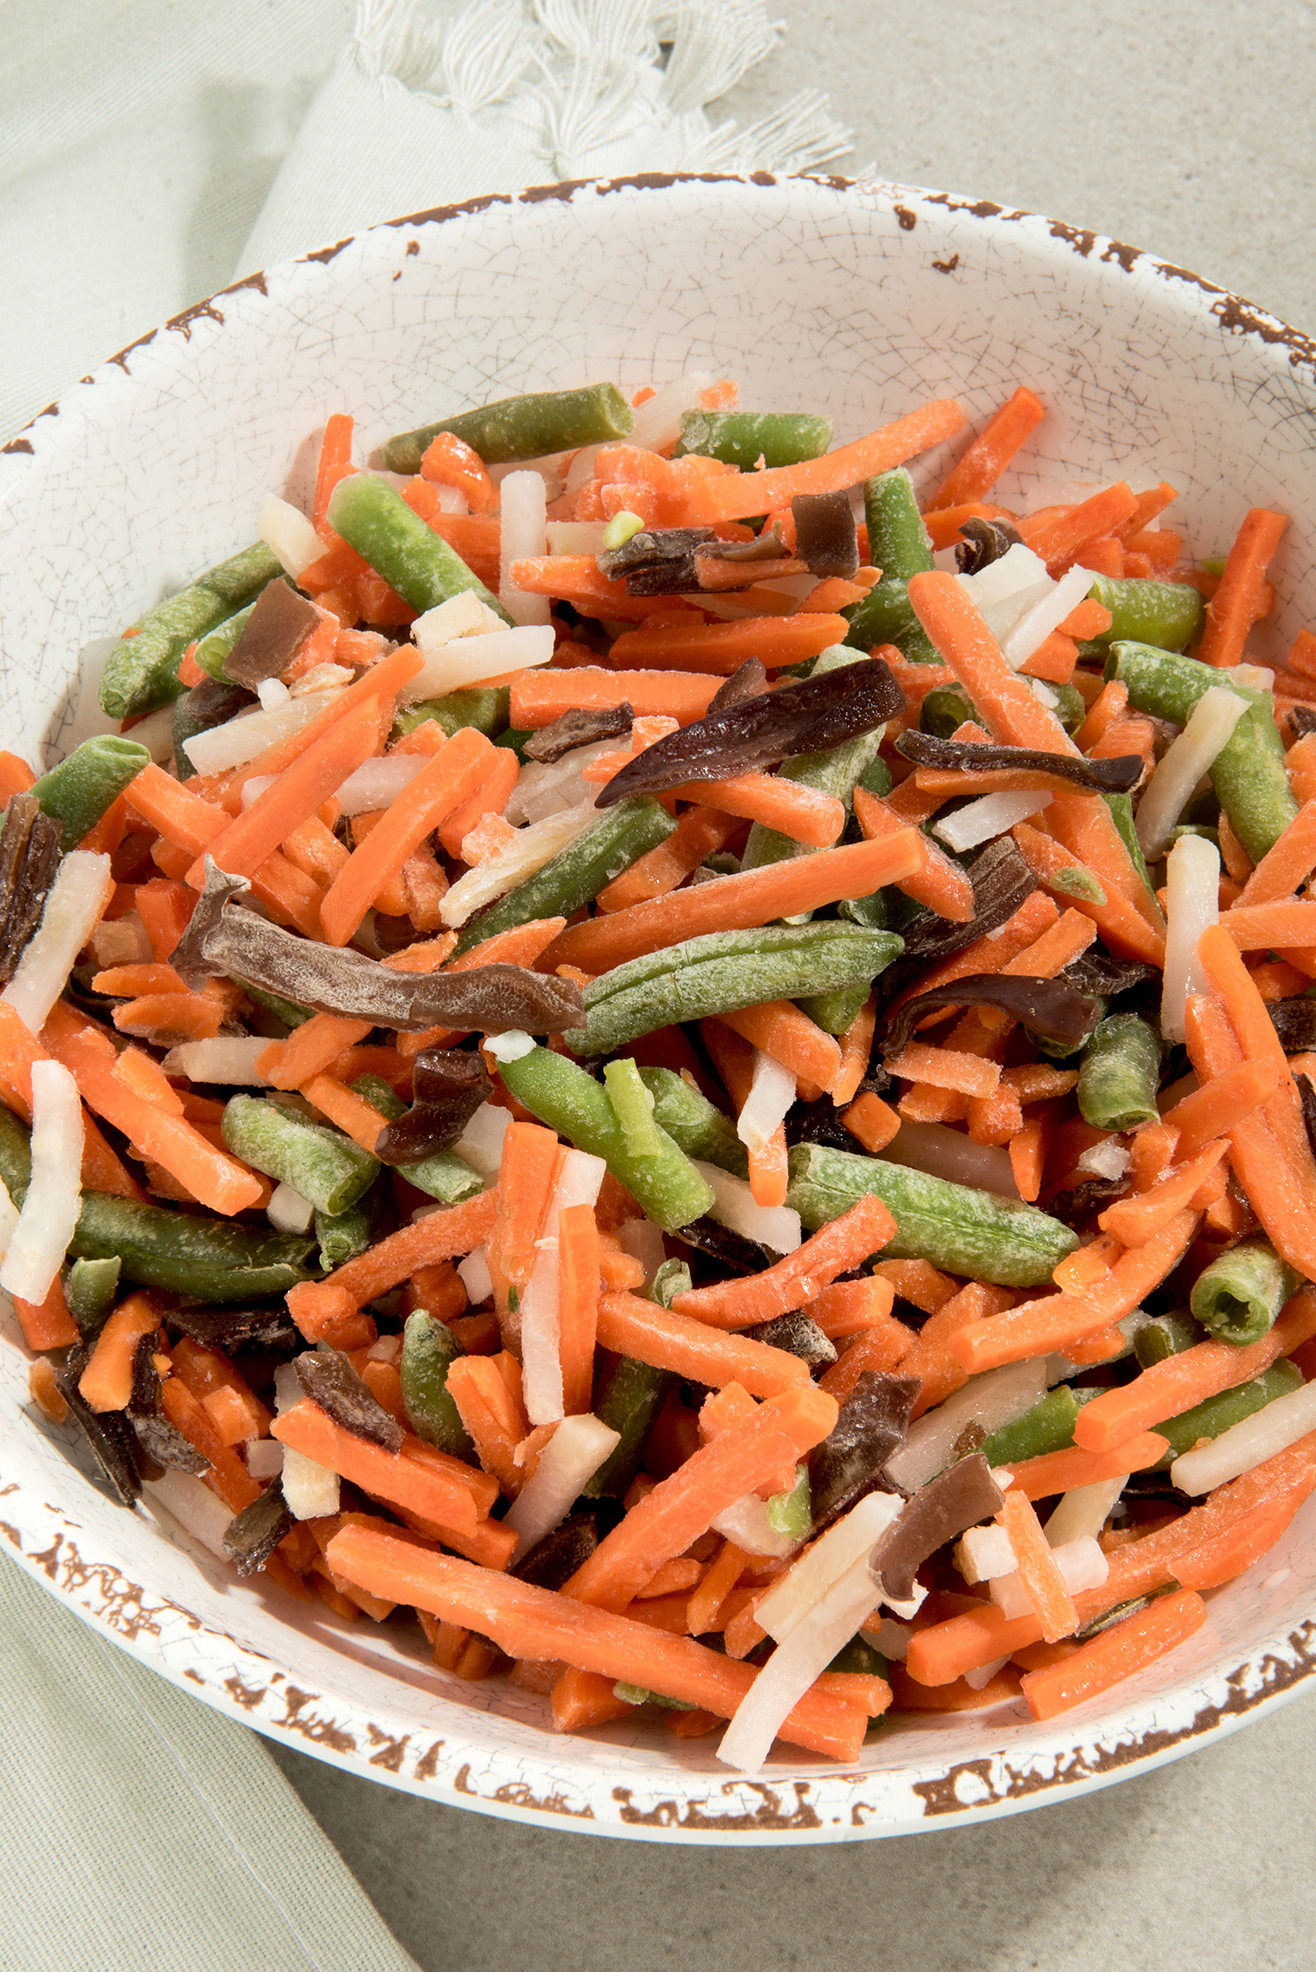 Pre-cut, ready-to-cook frozen vegetables